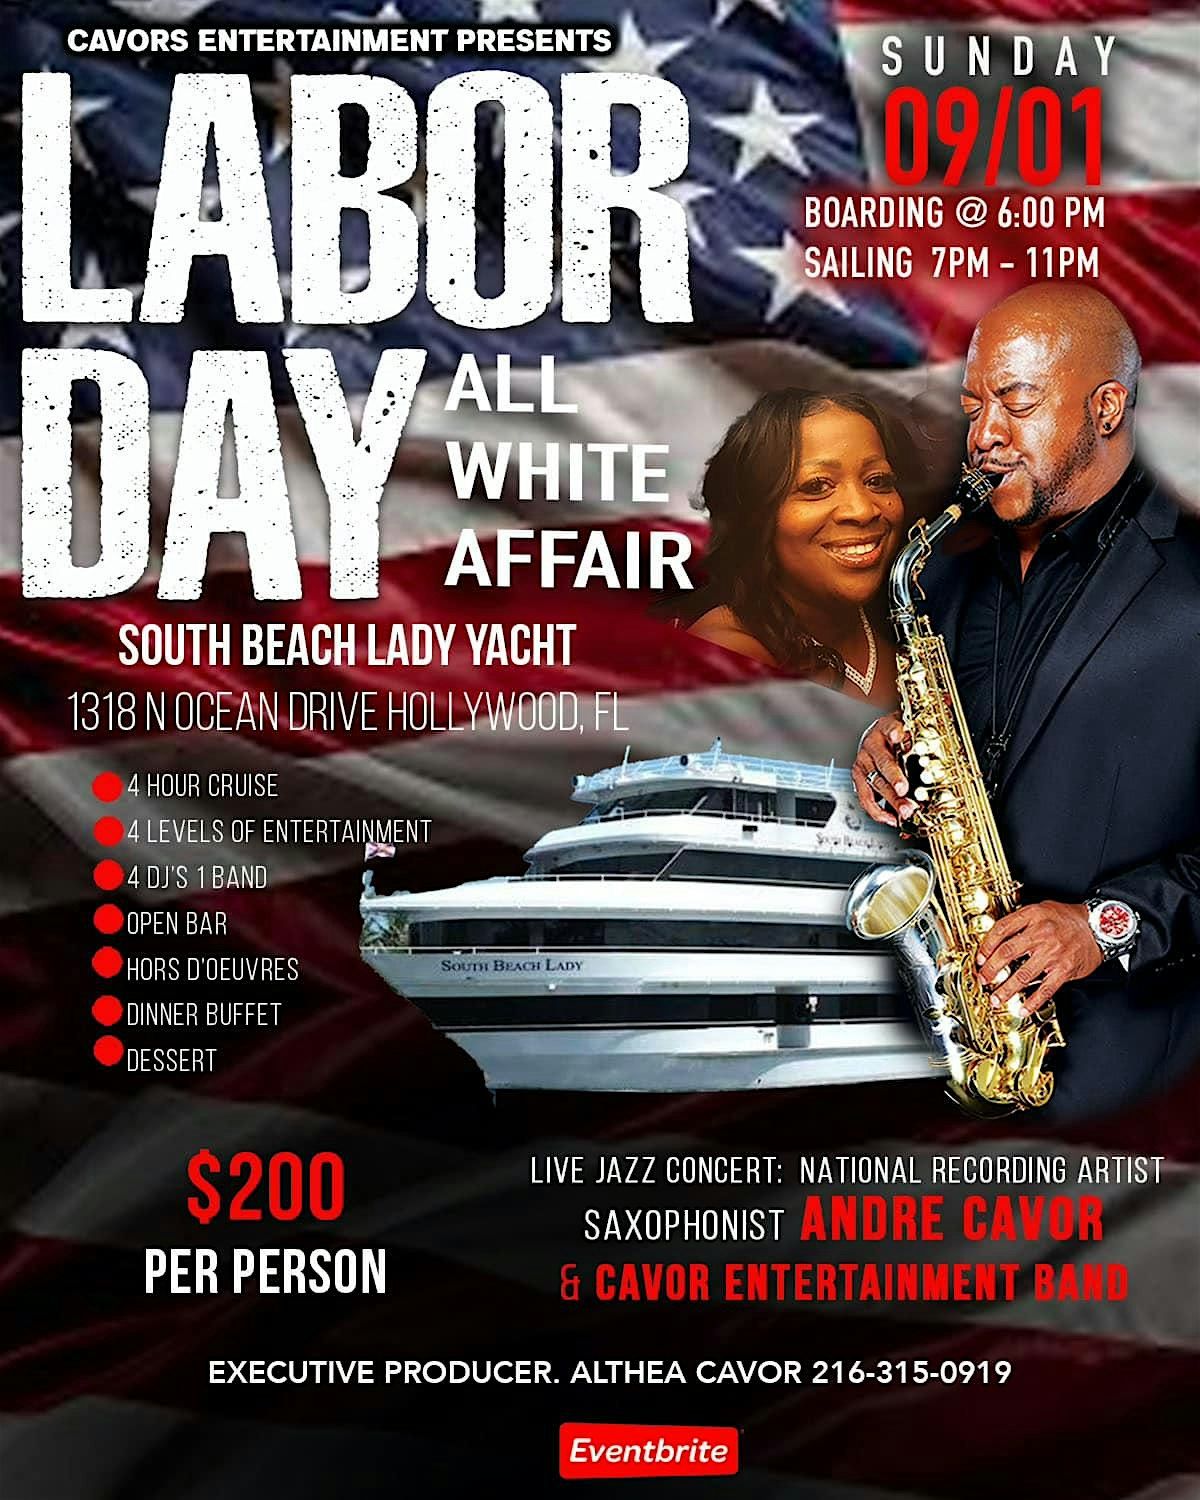 Hollywood Florida All White Attire Smooth Jazz Labor Day Sunday 4-hour Yacht Party